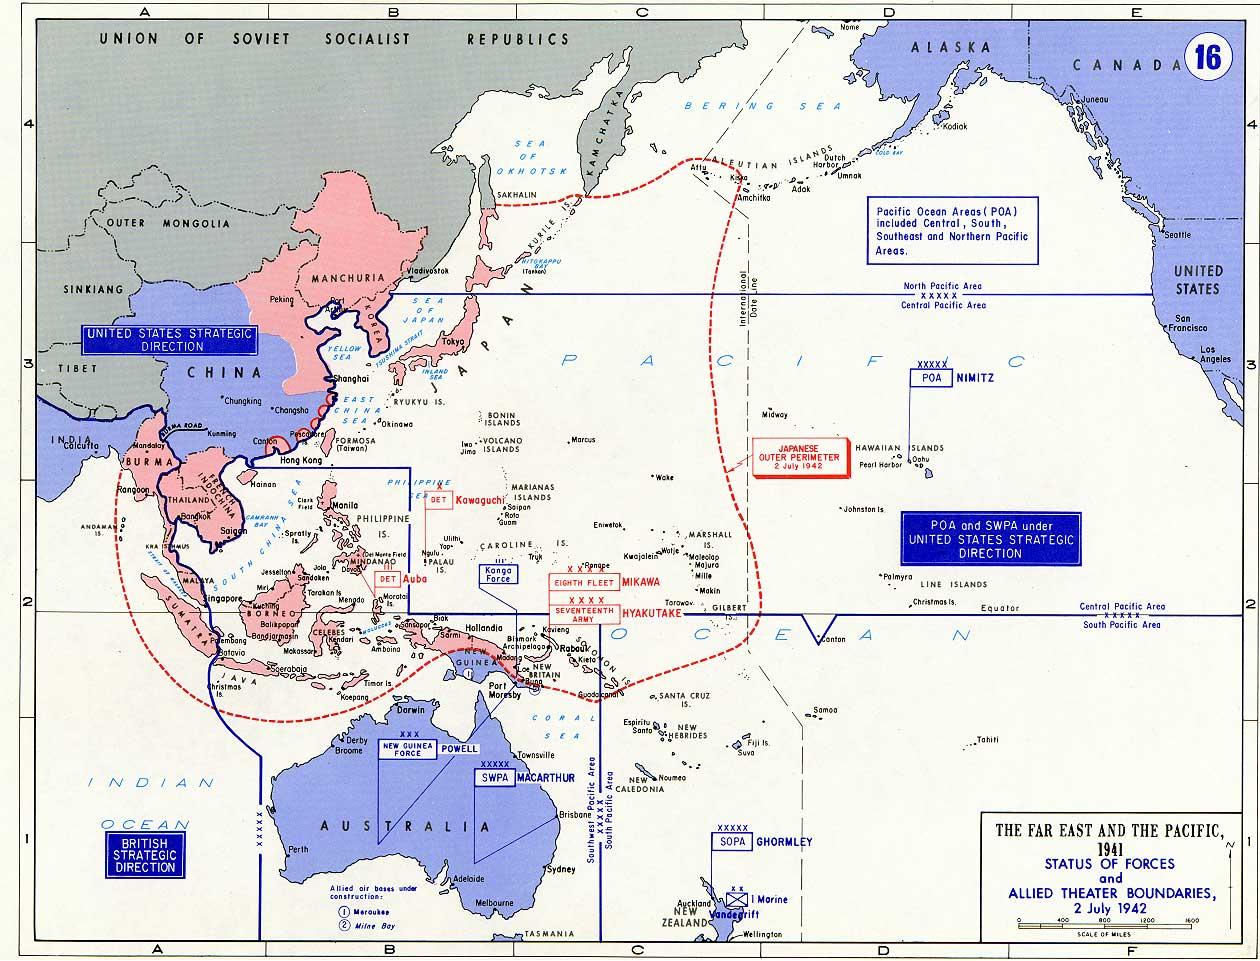 Map noting the boundaries of Allied and Japanese forces as of 2 Jul 1942